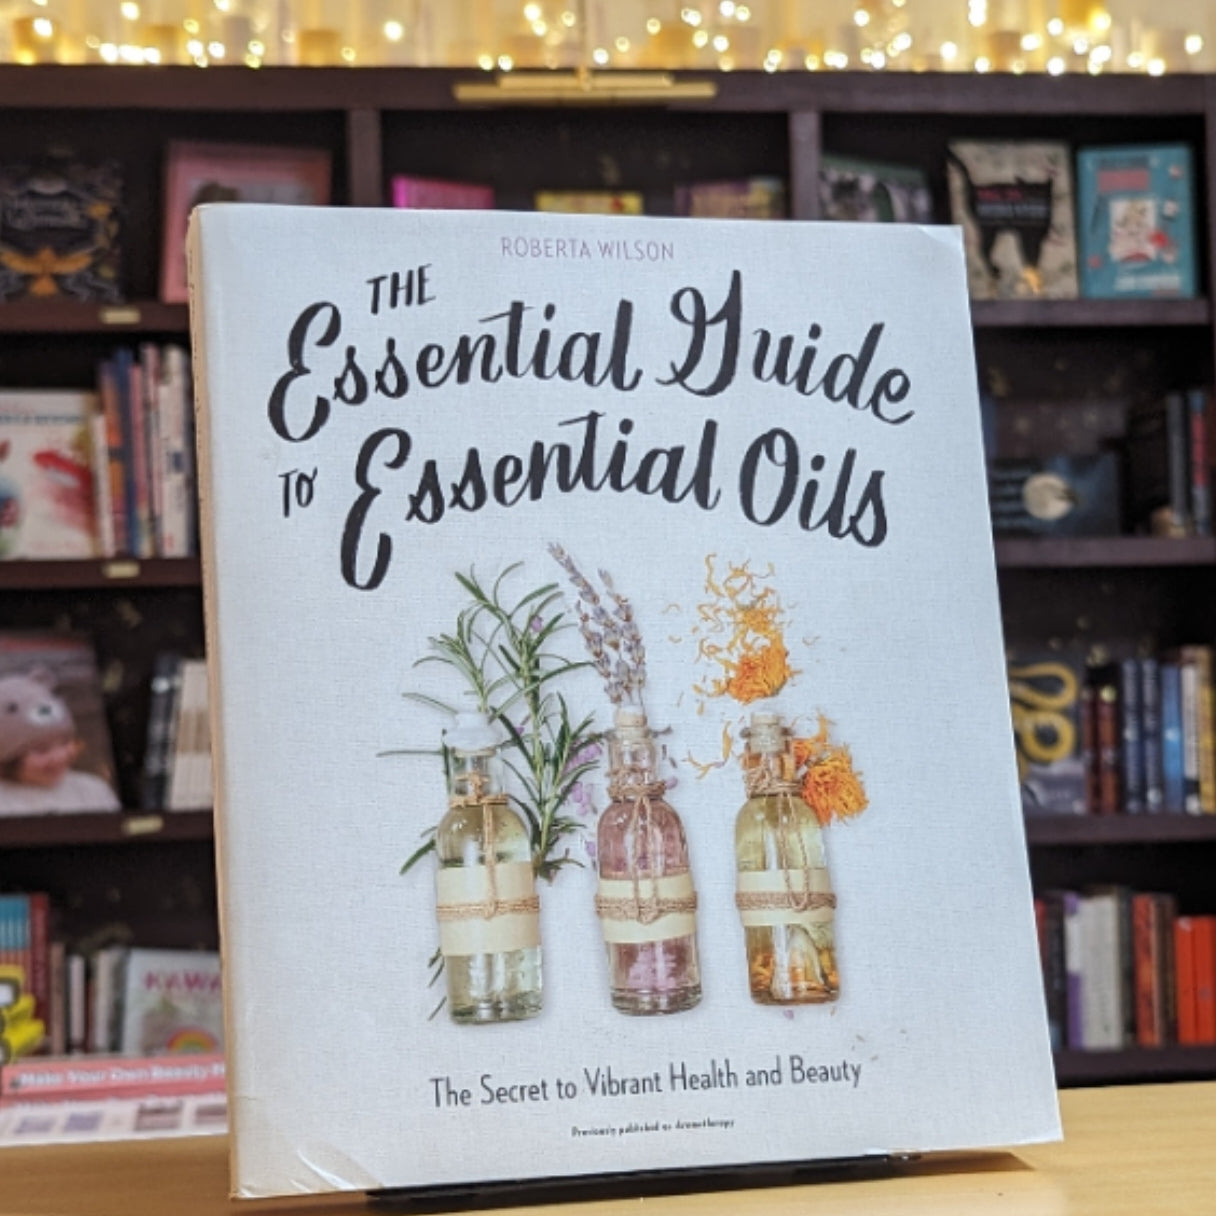 The Essential Guide to Essential Oils: The Secret to Vibrant Health and Beauty